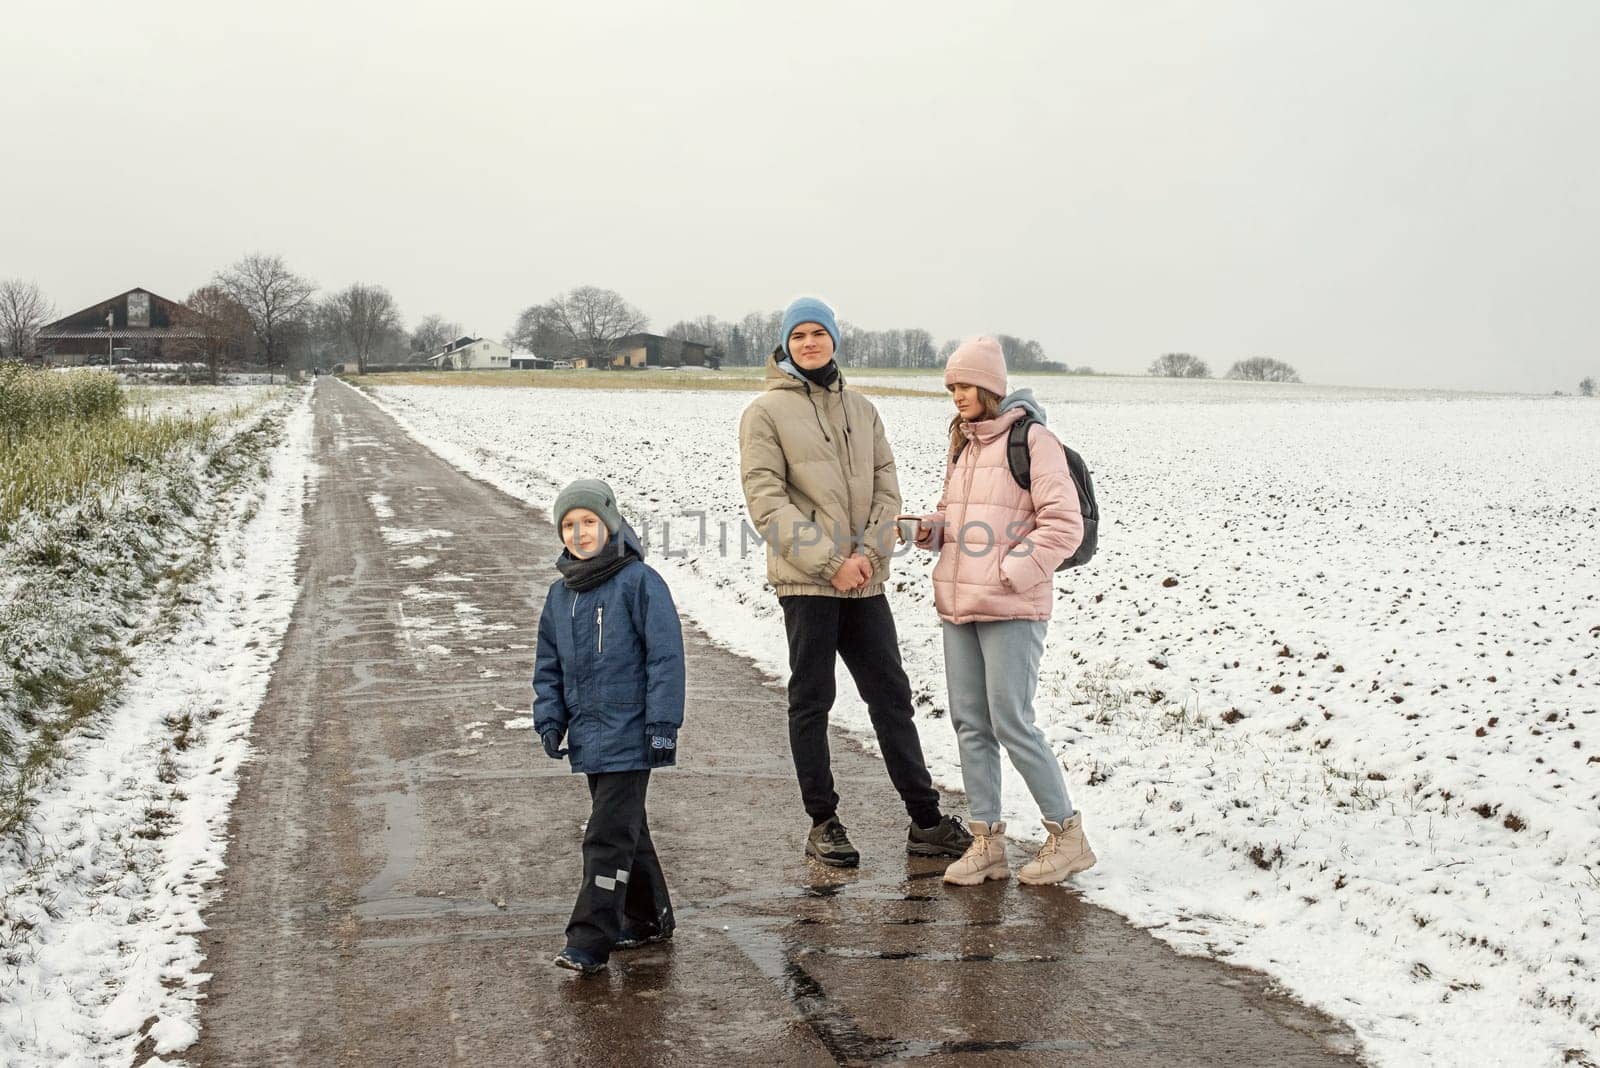 Winter Family Bliss: Mother and Two Sons Enjoying a Snowy Countryside Stroll